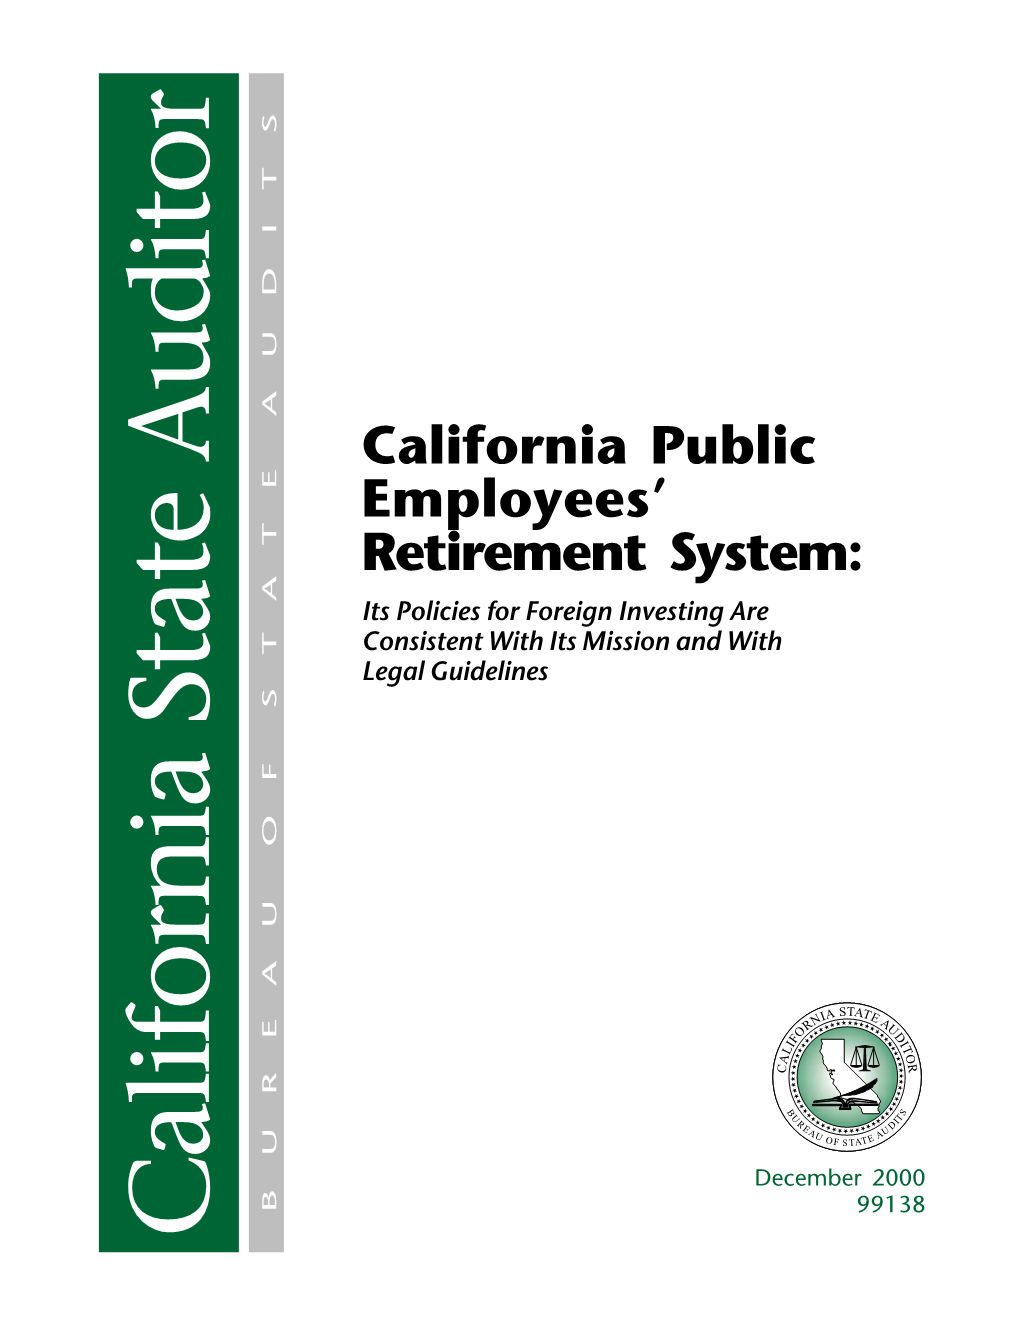 California Public Employees' Retirement System: Its Policies For